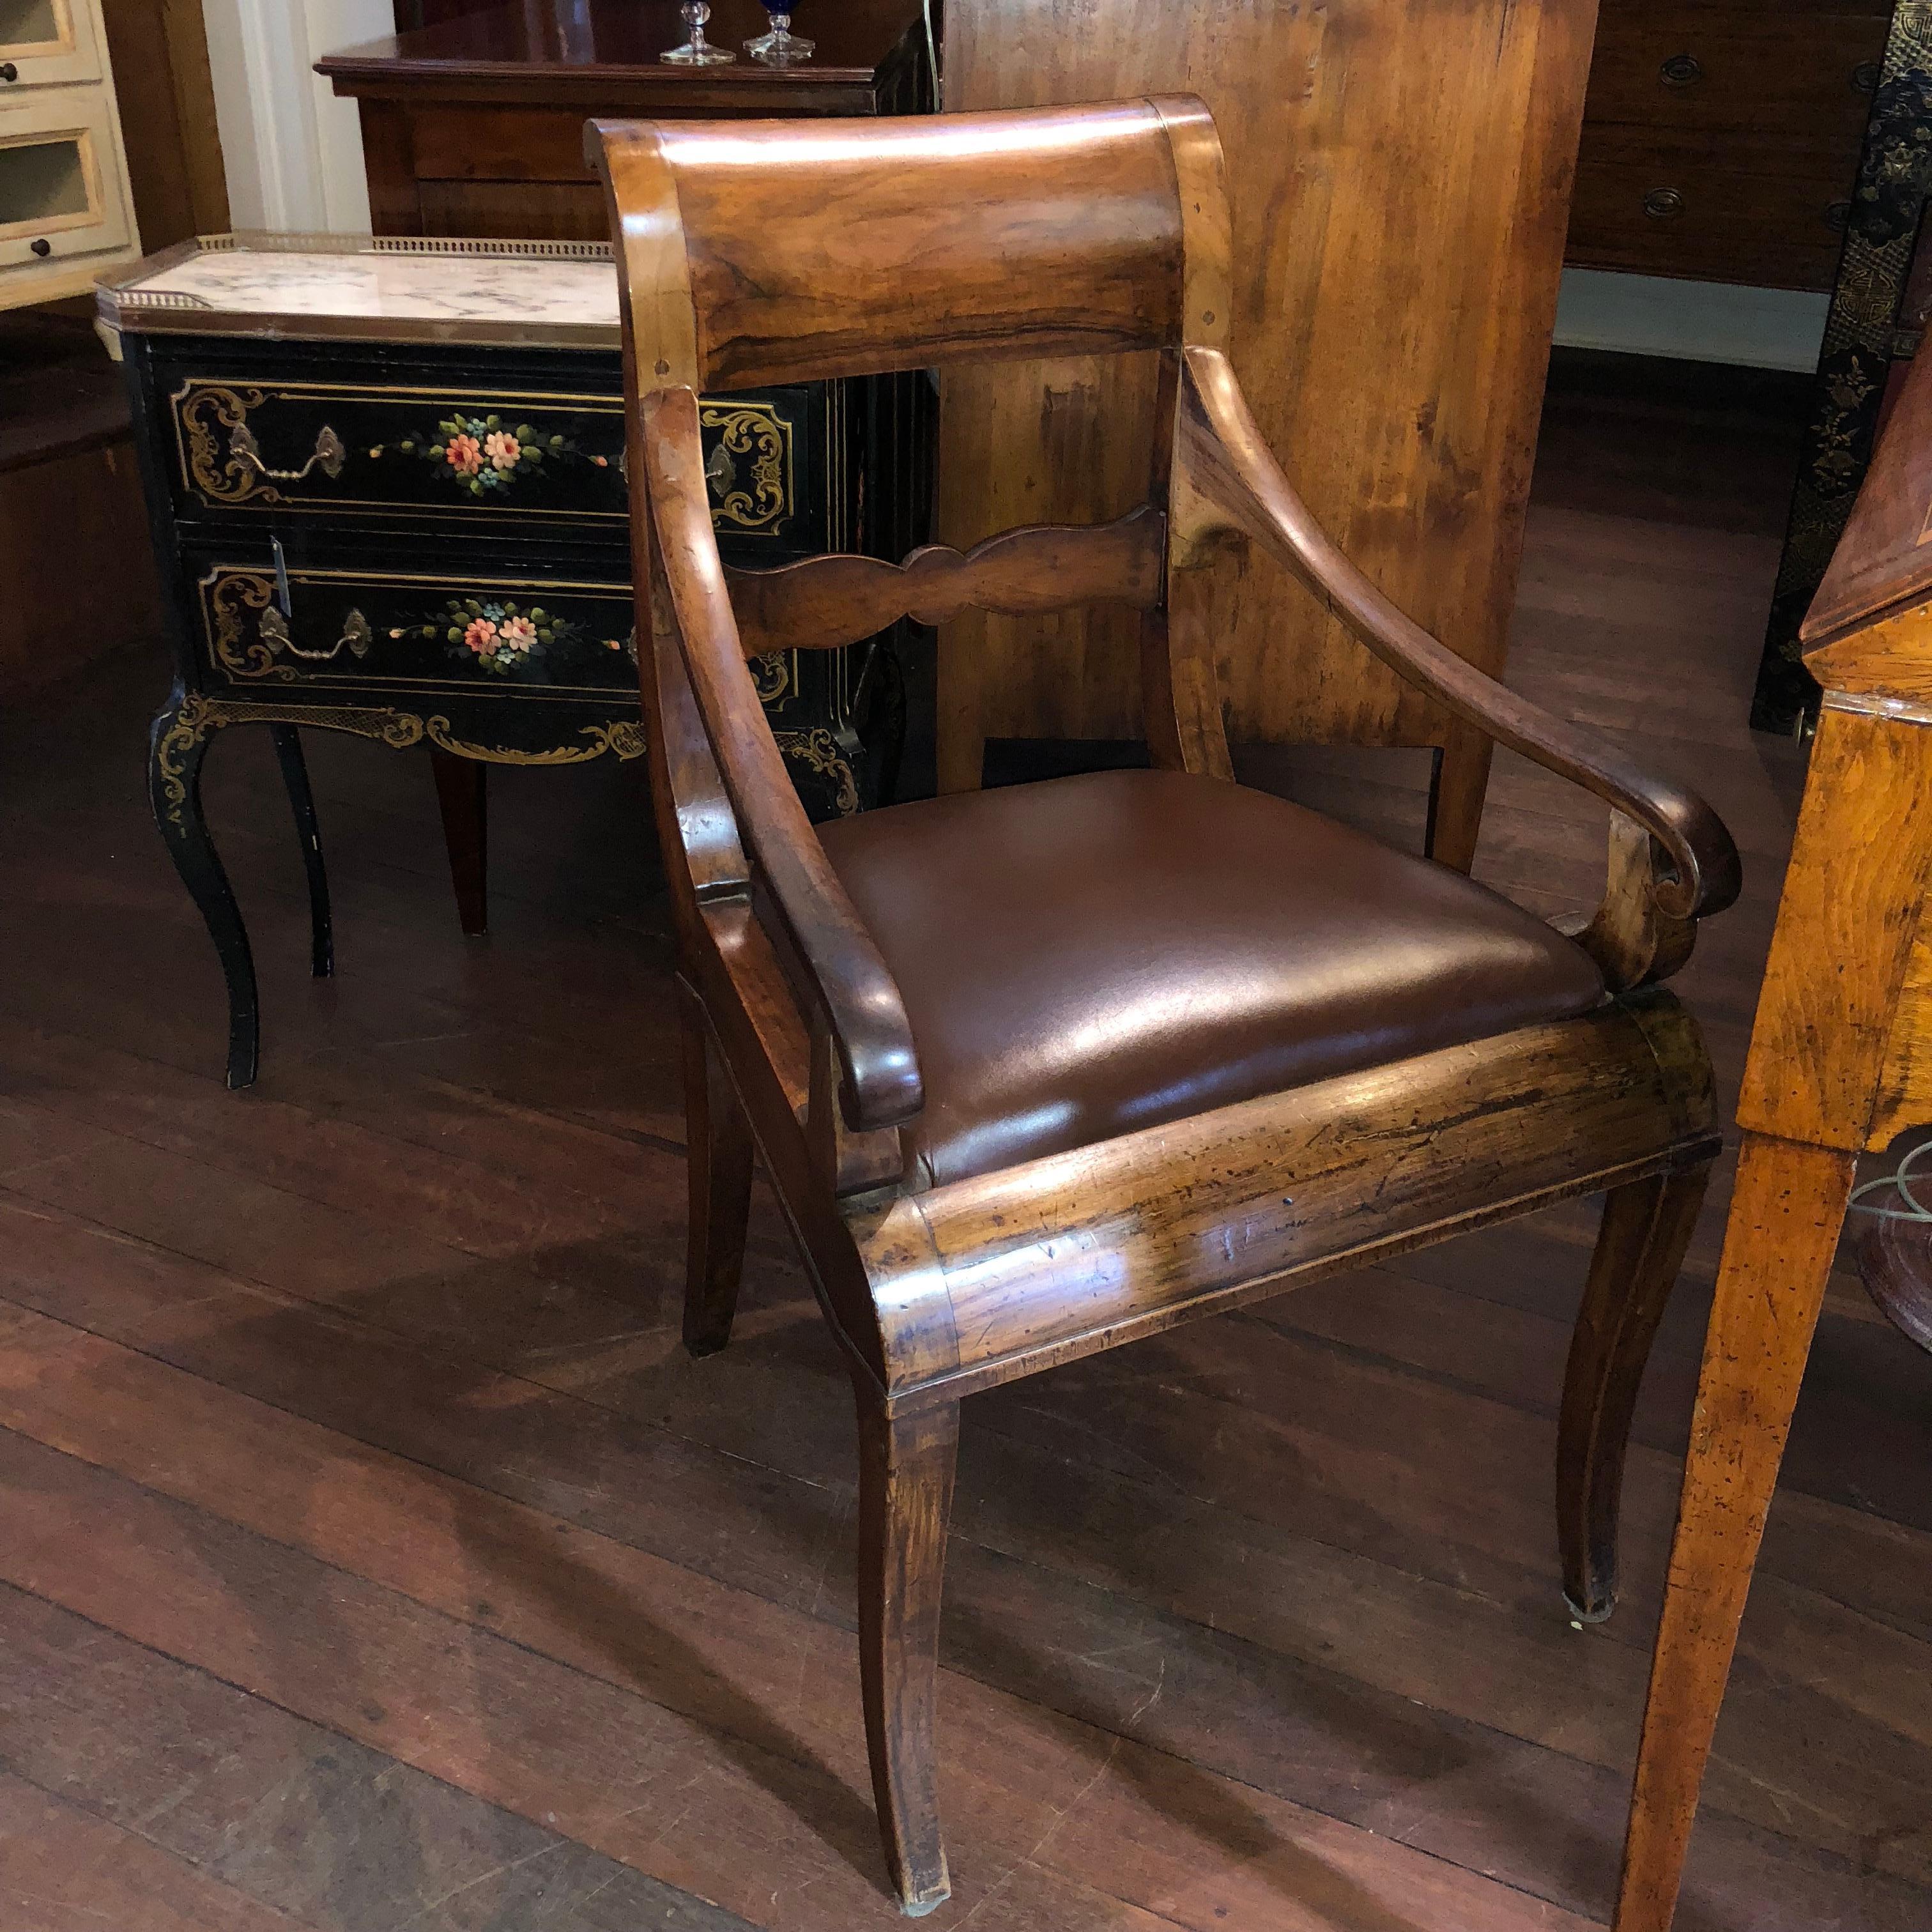 This sensational Italian walnut chair has been dated at mid 19th Century and features curved, scroll top ladder-back and delicately scrolled arms. The seat has been later re-upholstered with soft Italian brown leather, allowing for great